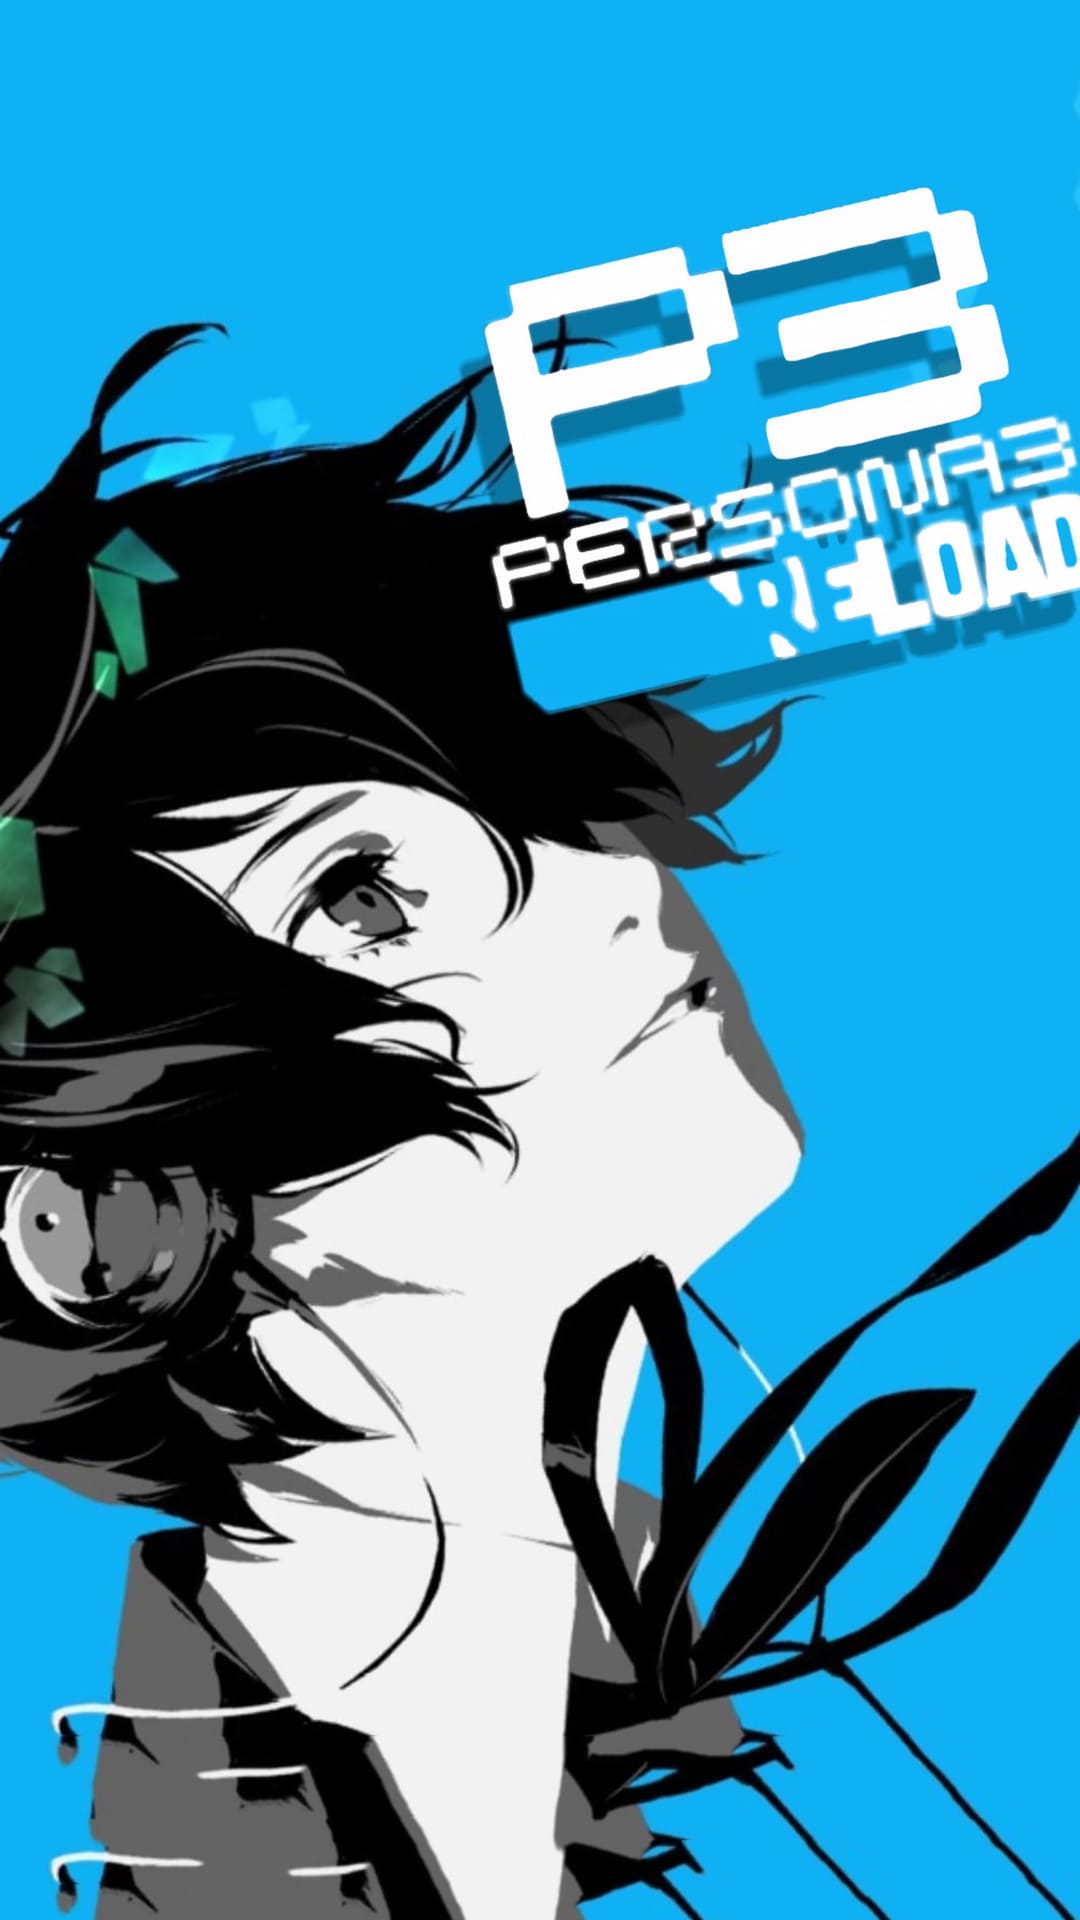 Persona 3 wallpaper by Reaperwh  Download on ZEDGE  06c8